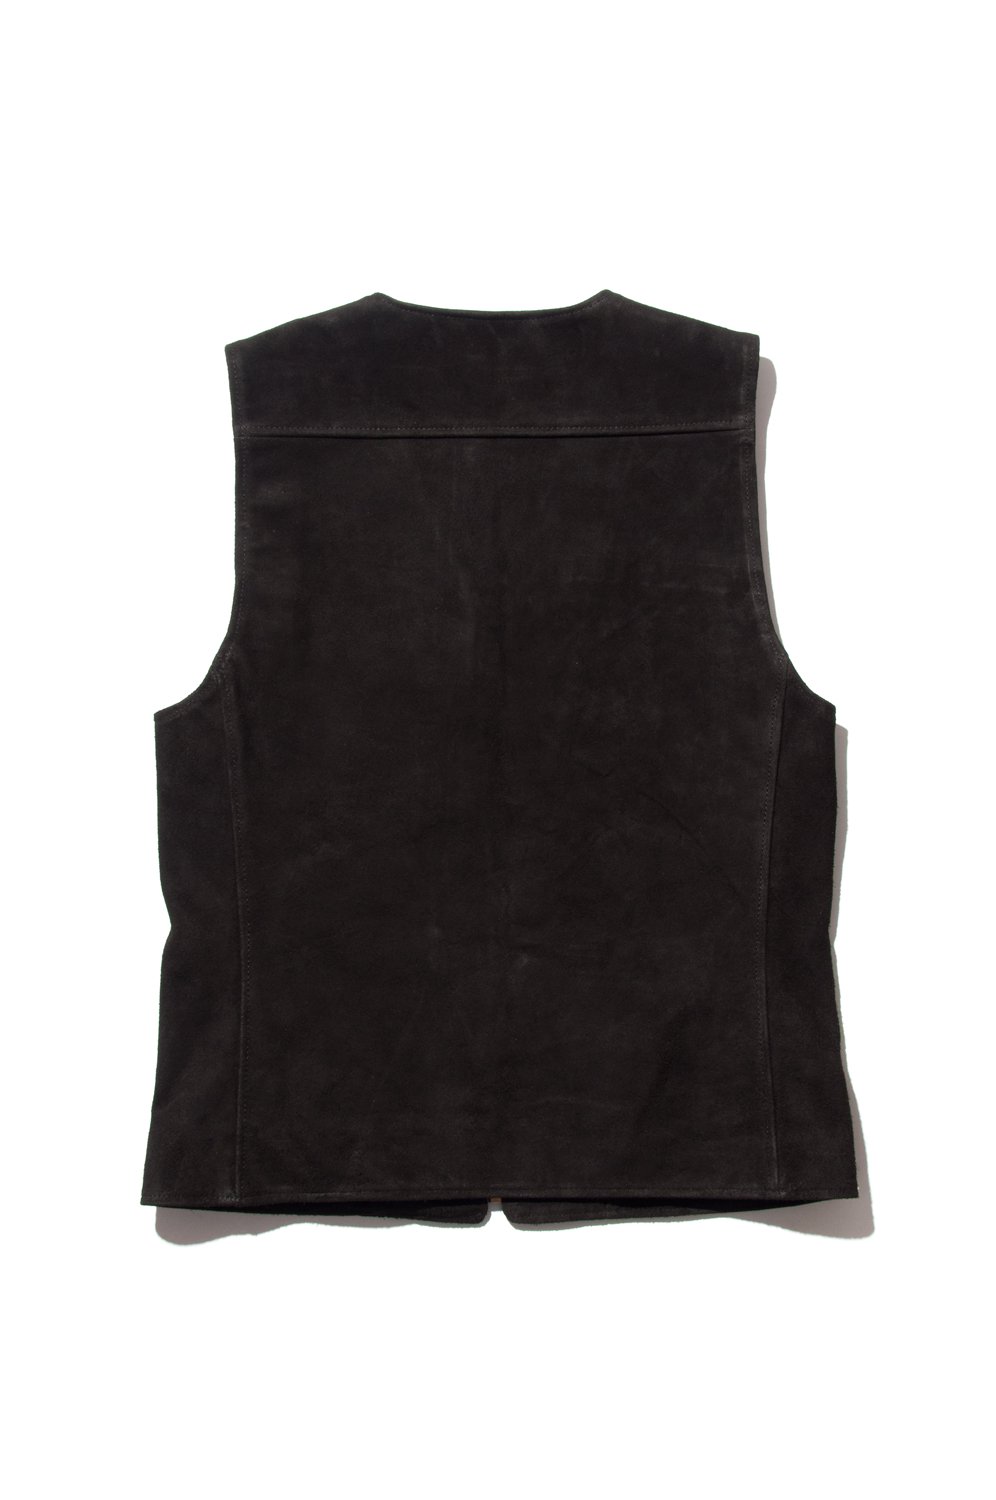 Y'2 LEATHER(ワイツーレザー) カウスエードベスト COW SUEDE ZIP VEST TV-05 通販正規取扱|ハーレムストア